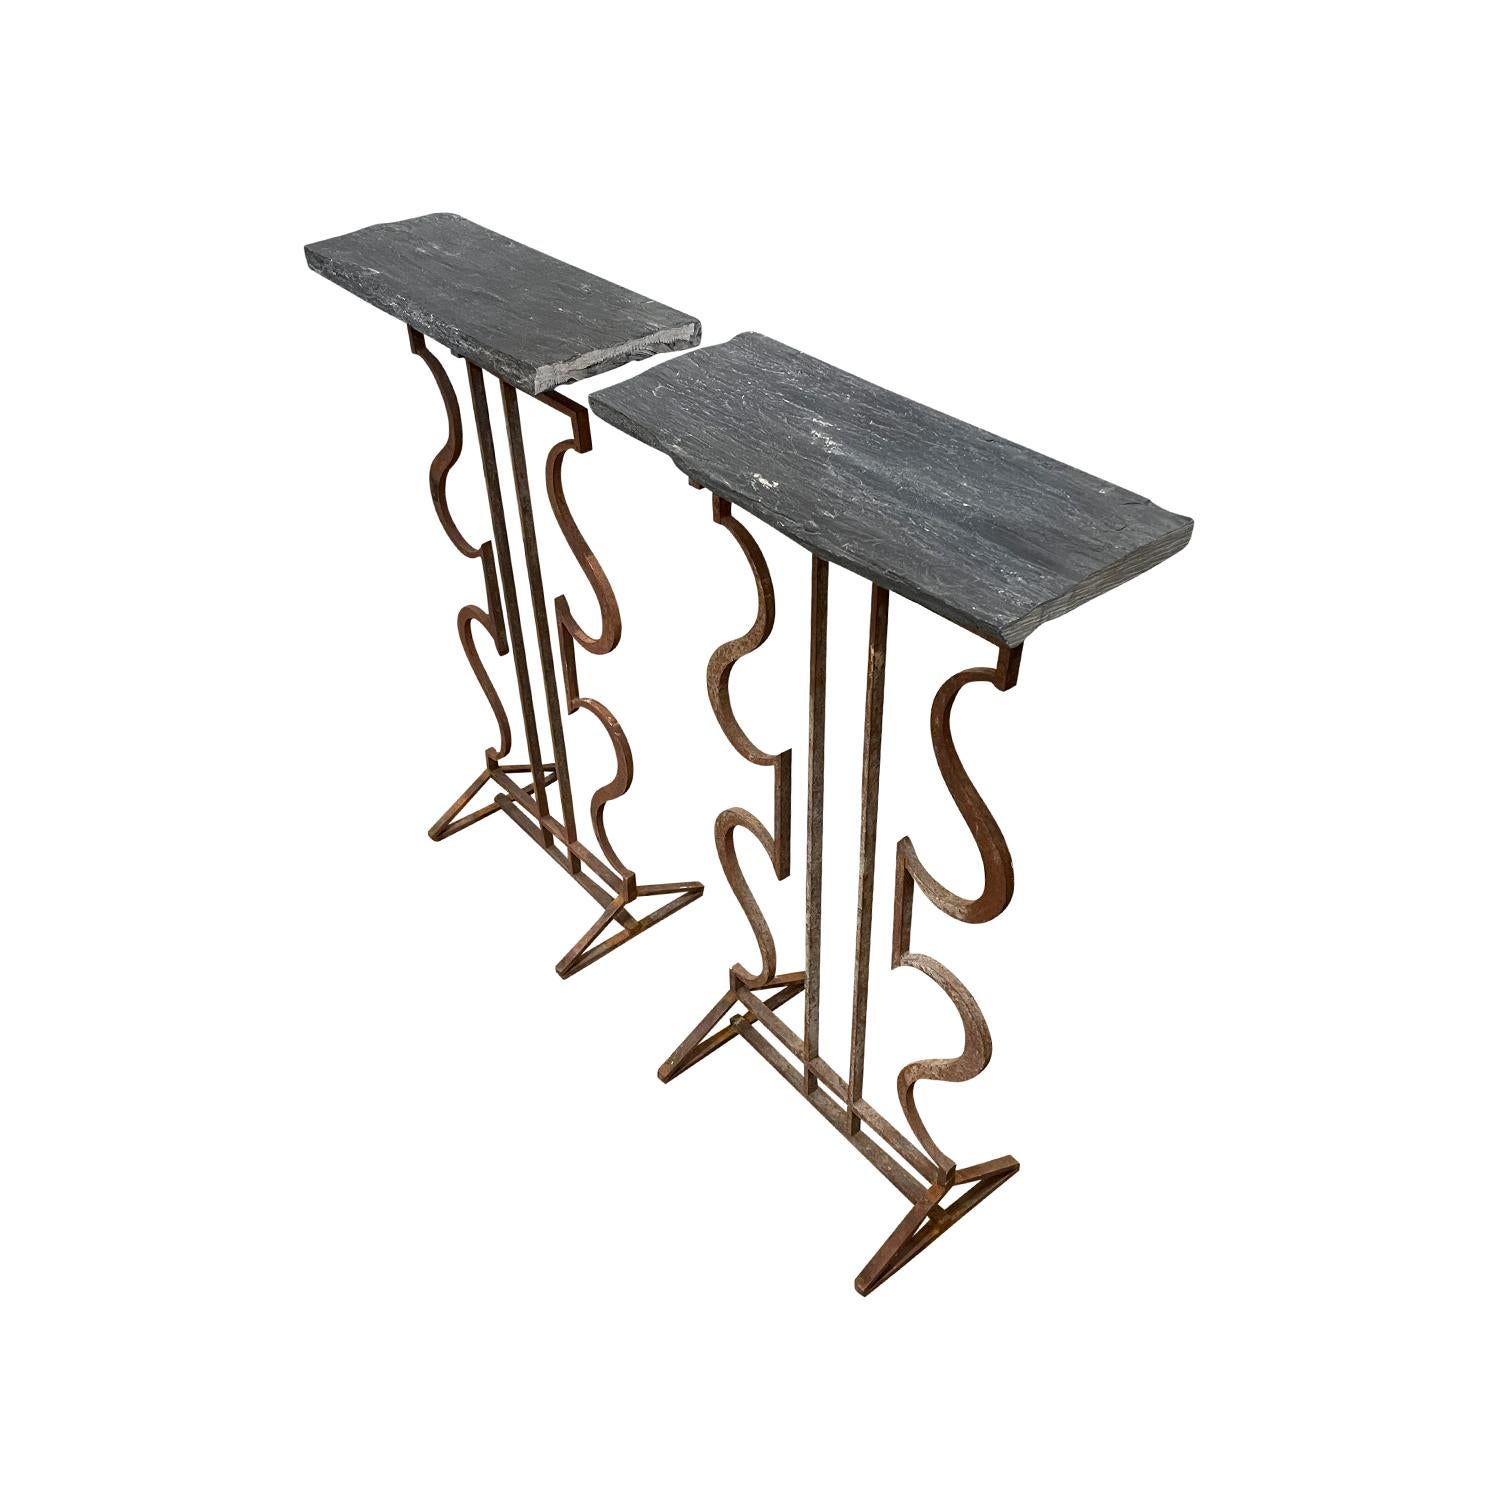 Hand-Crafted 20th Century French Pair of Vintage Iron Console Tables with Slate Tops